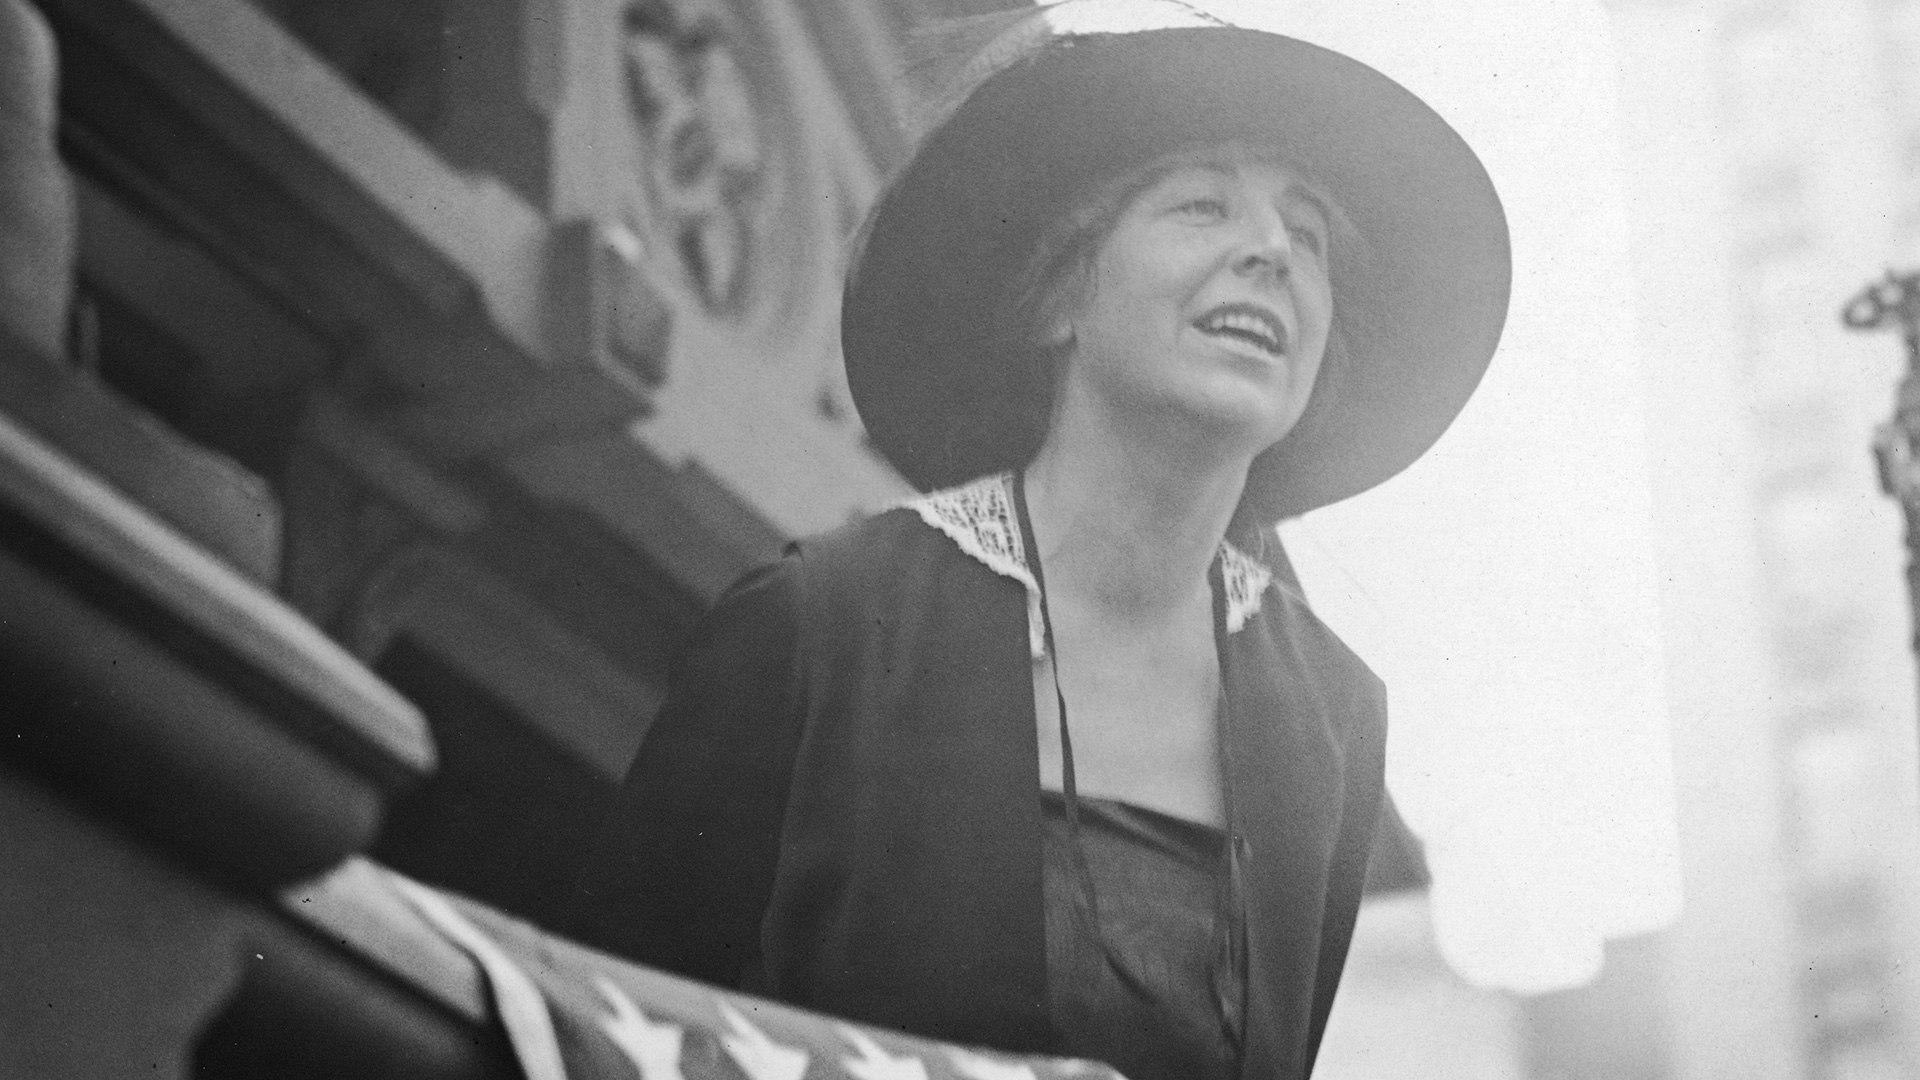 April 2, 1917: Jeannette Rankin Became the First Woman to Serve in Congress